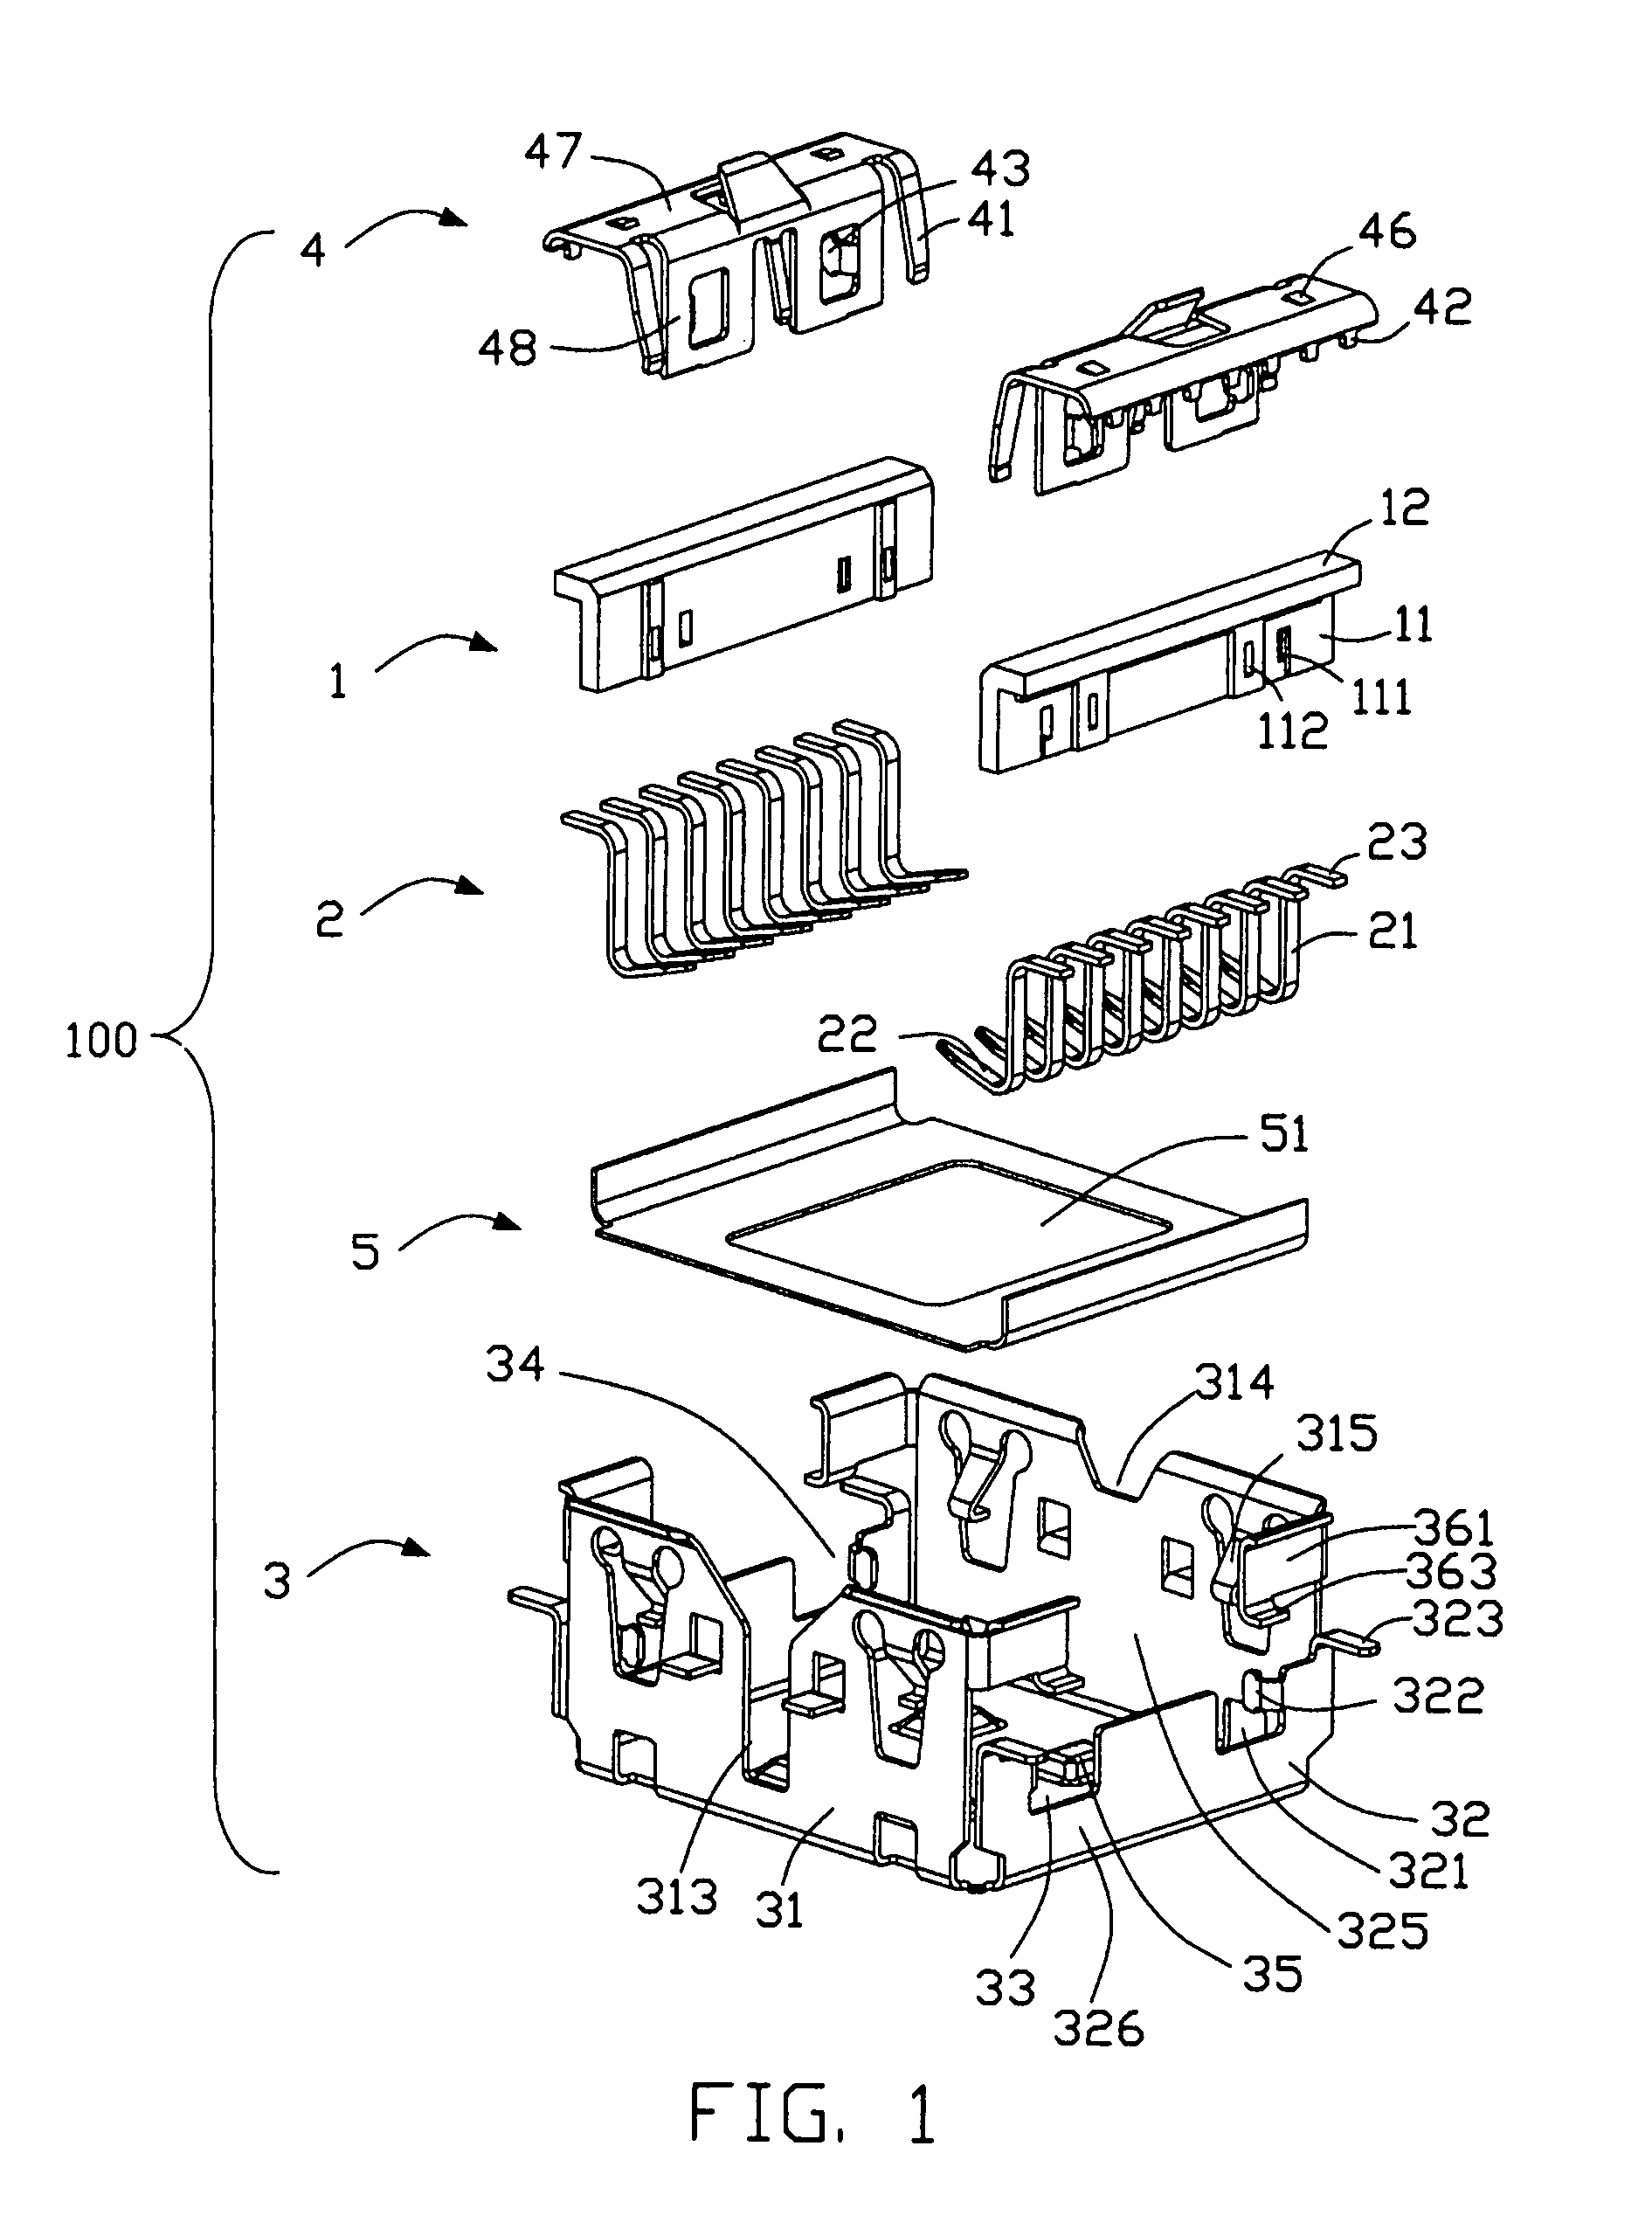 Electrical connector having improved shield